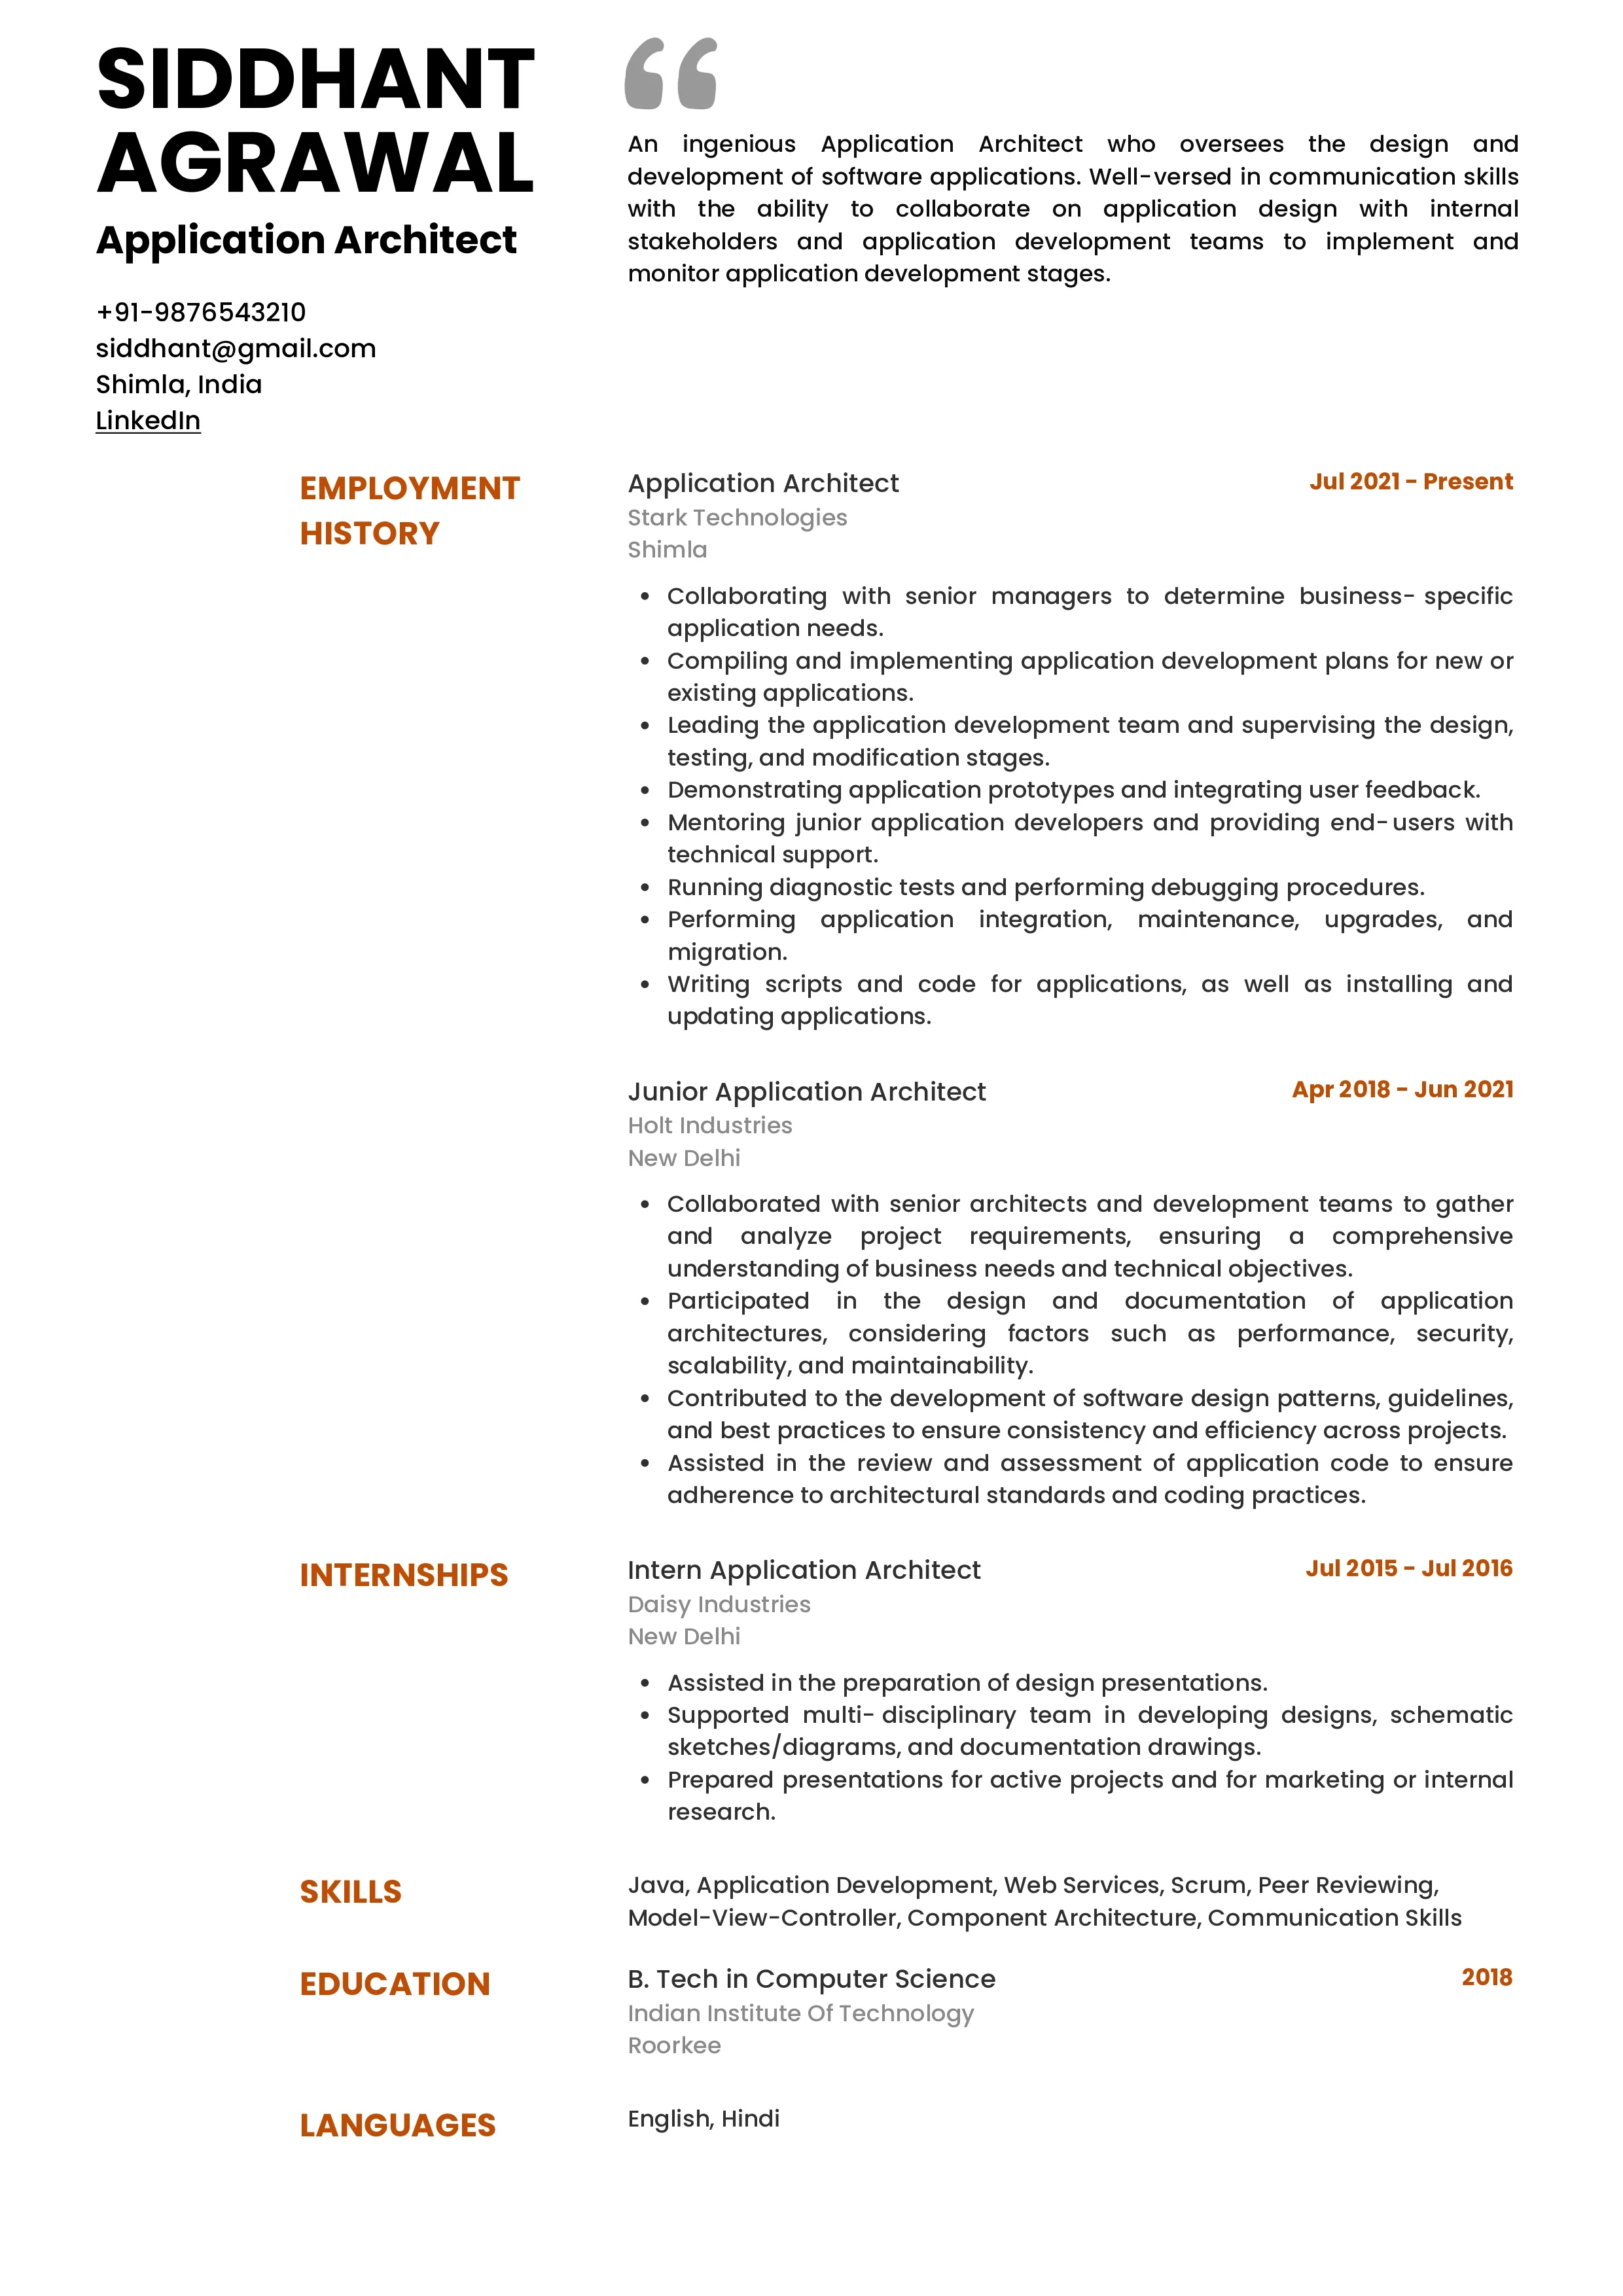 Sample Resume of Application Architect | Free Resume Templates & Samples on Resumod.co